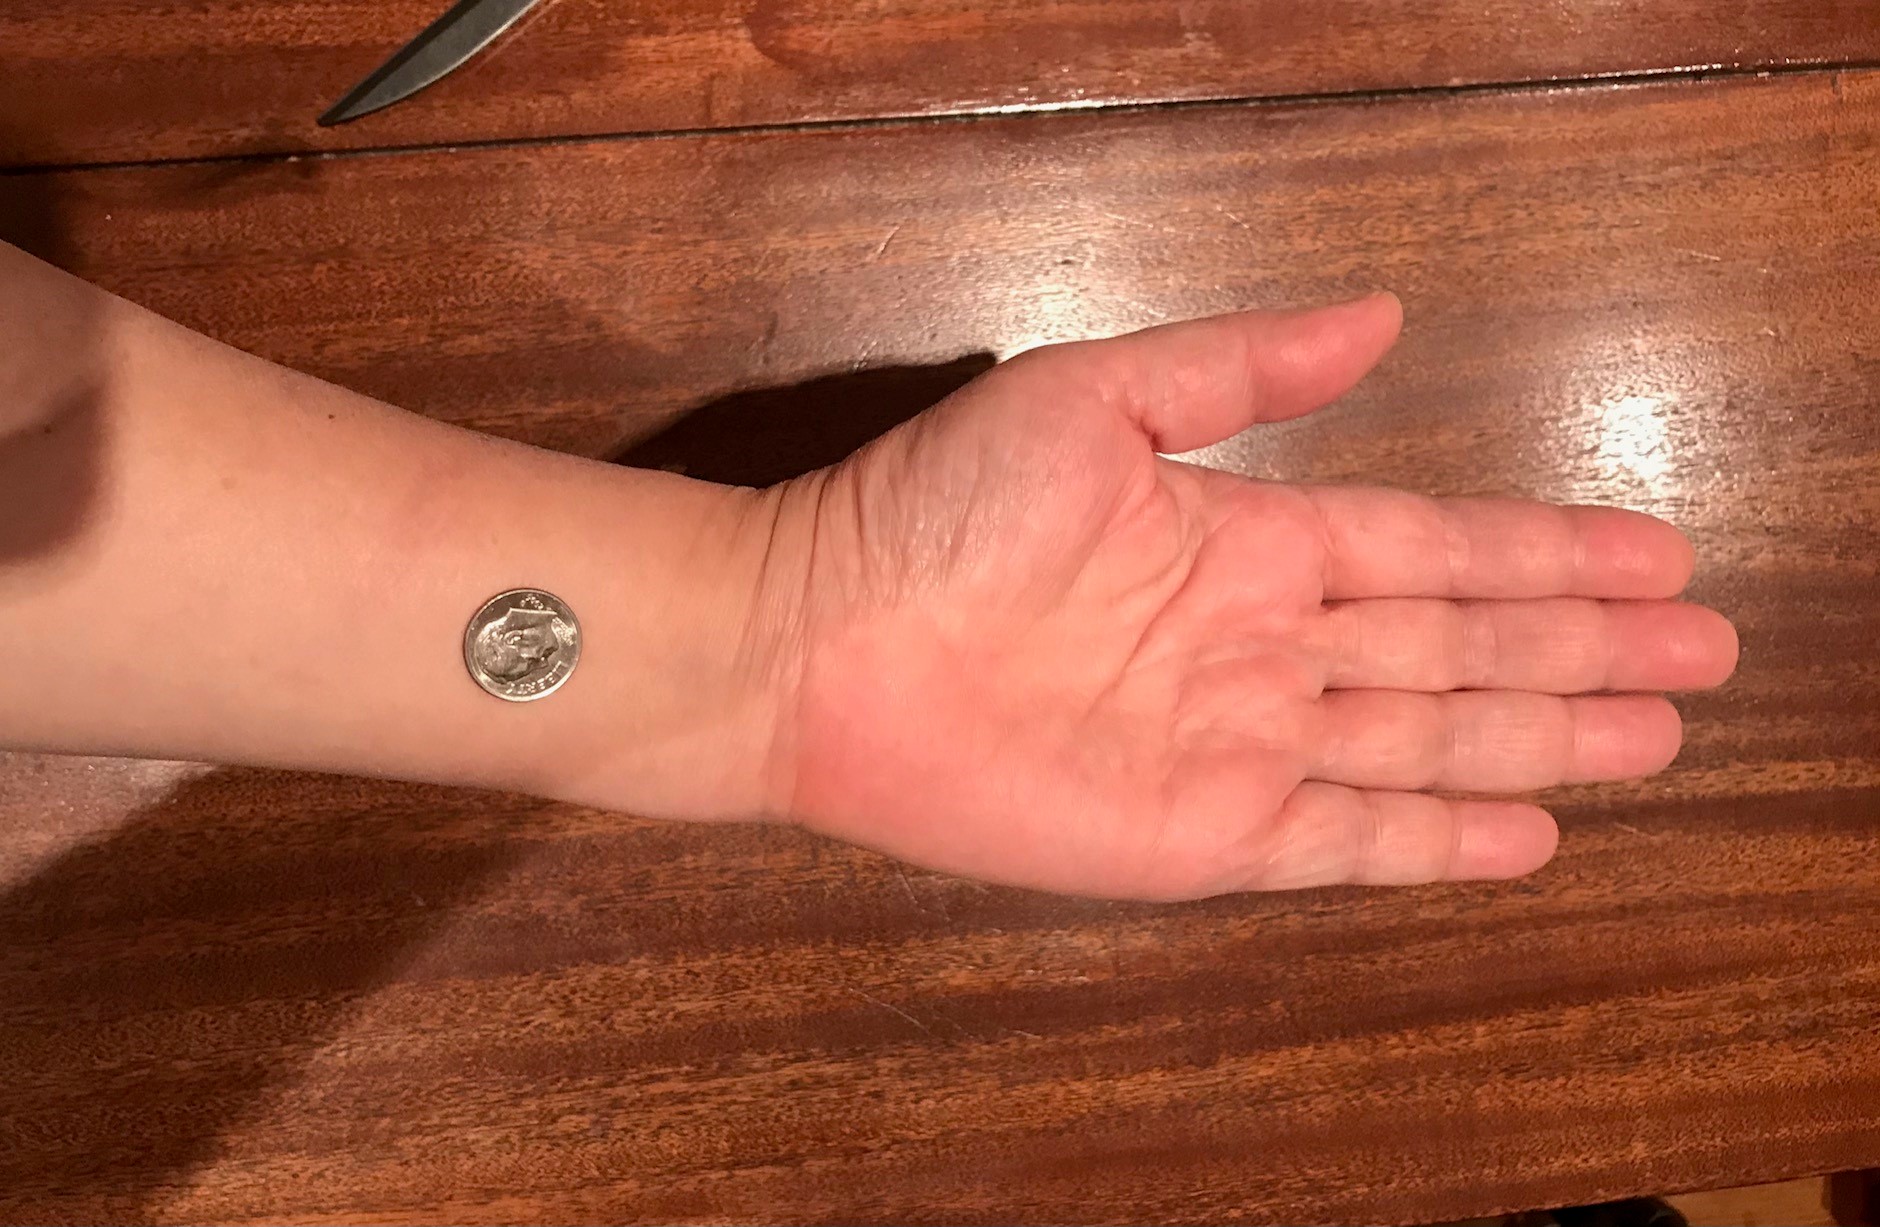 An image of a hand with the naikan pressure point